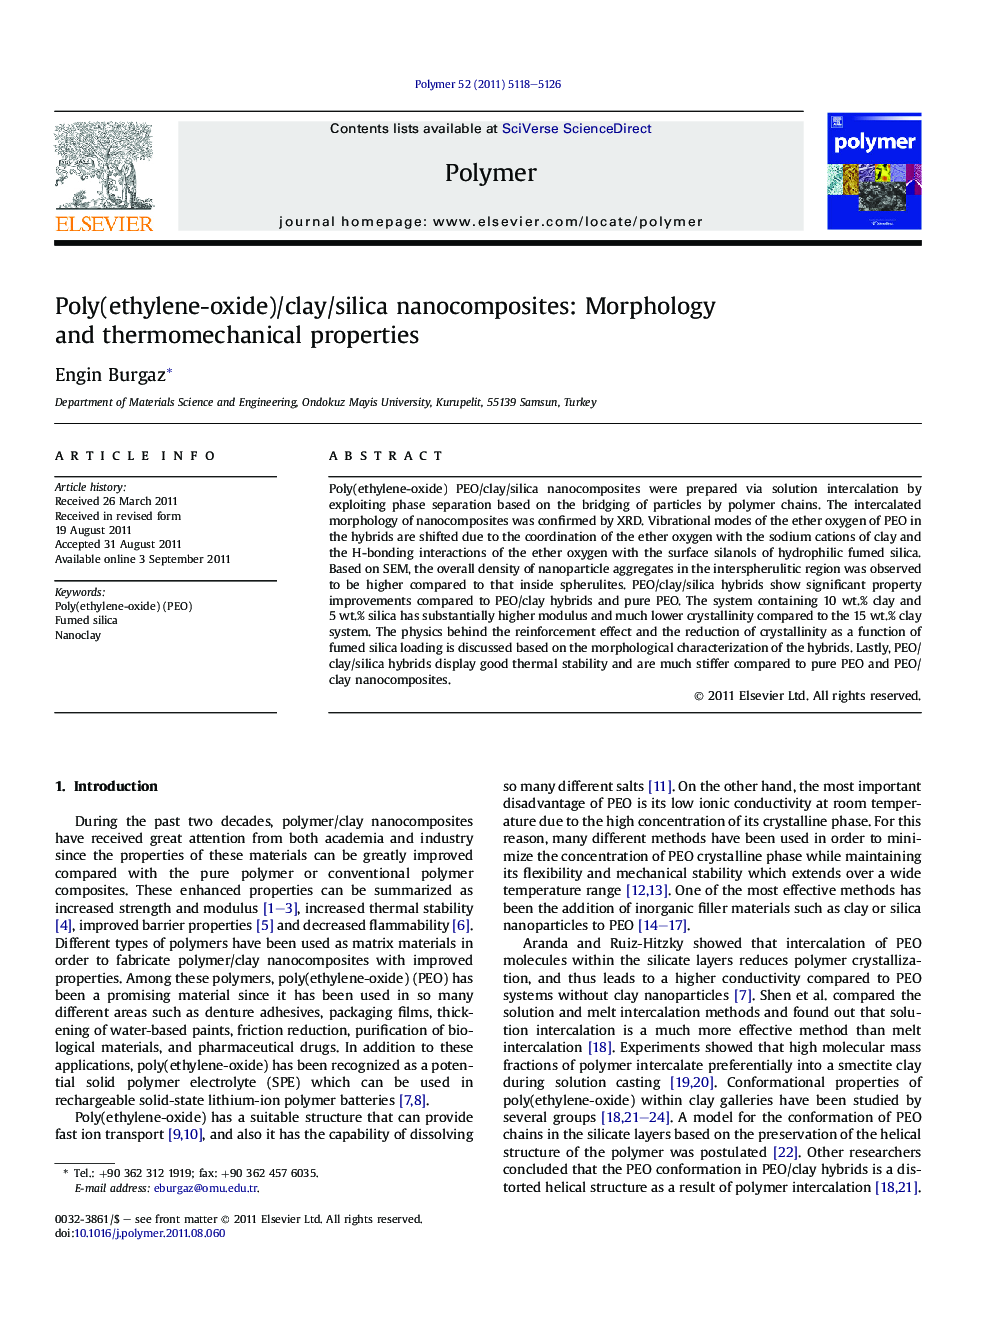 Poly(ethylene-oxide)/clay/silica nanocomposites: Morphology and thermomechanical properties